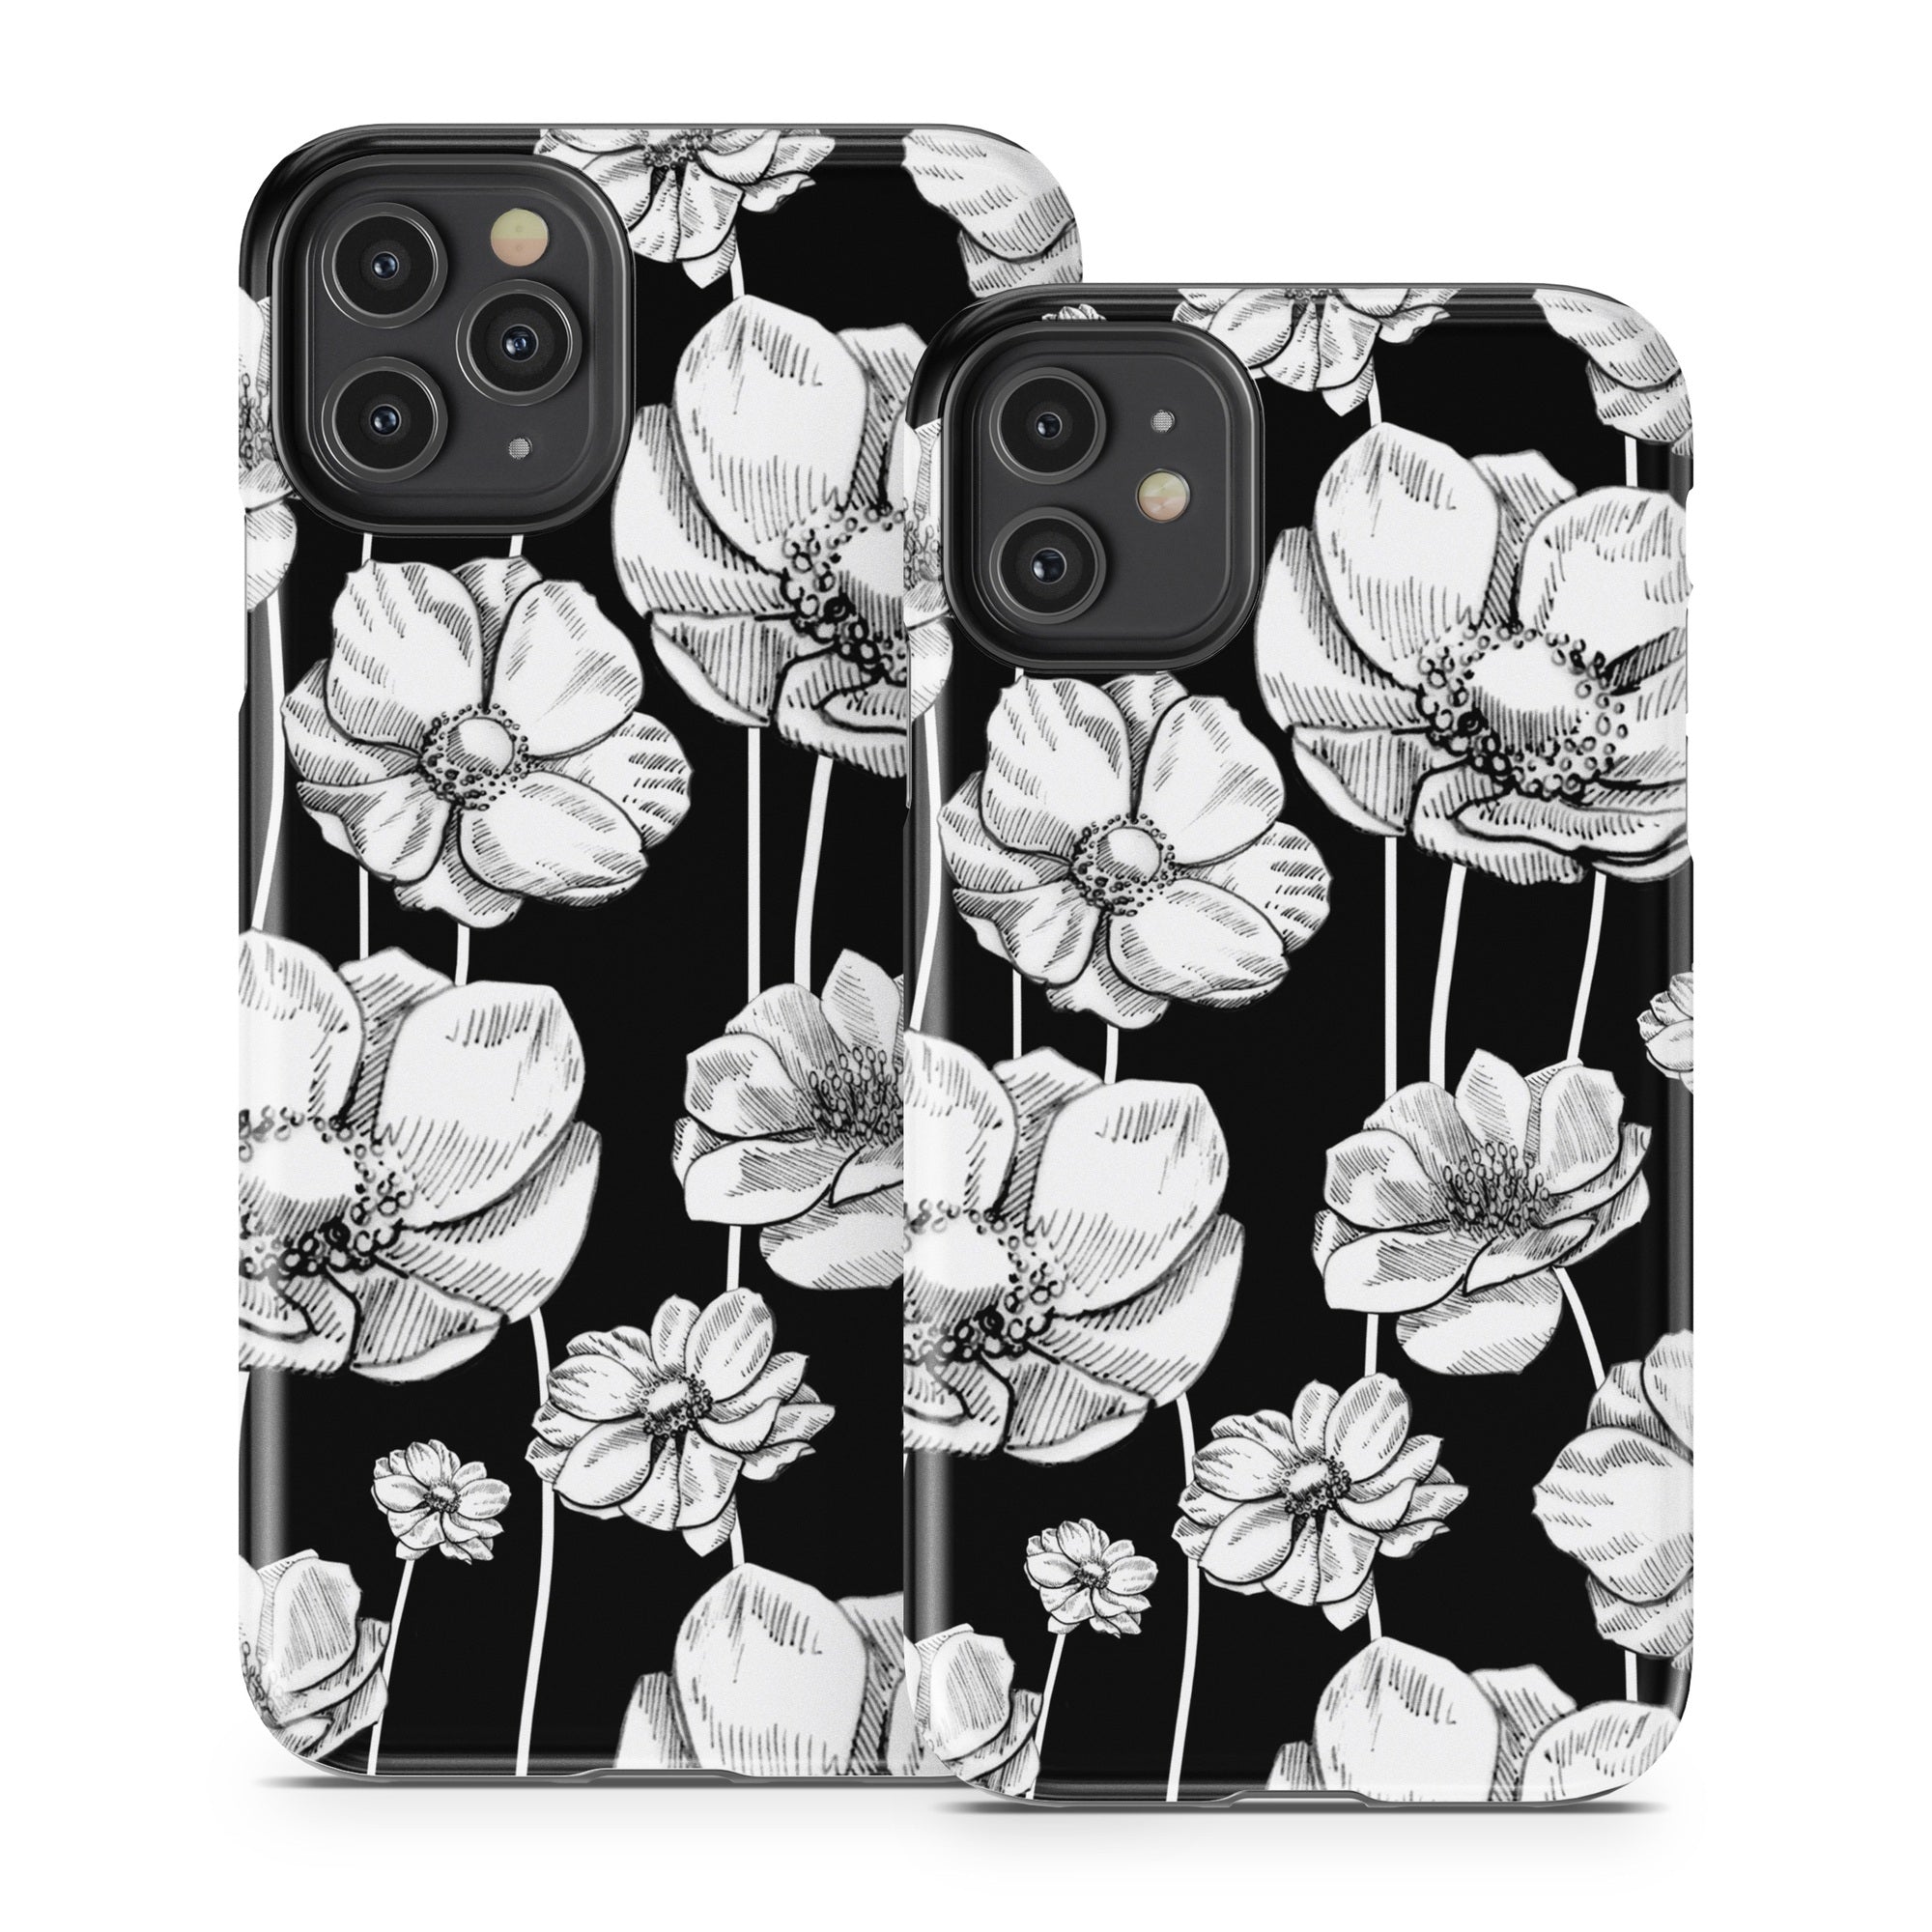 Striped Blooms - Apple iPhone 11 Tough Case